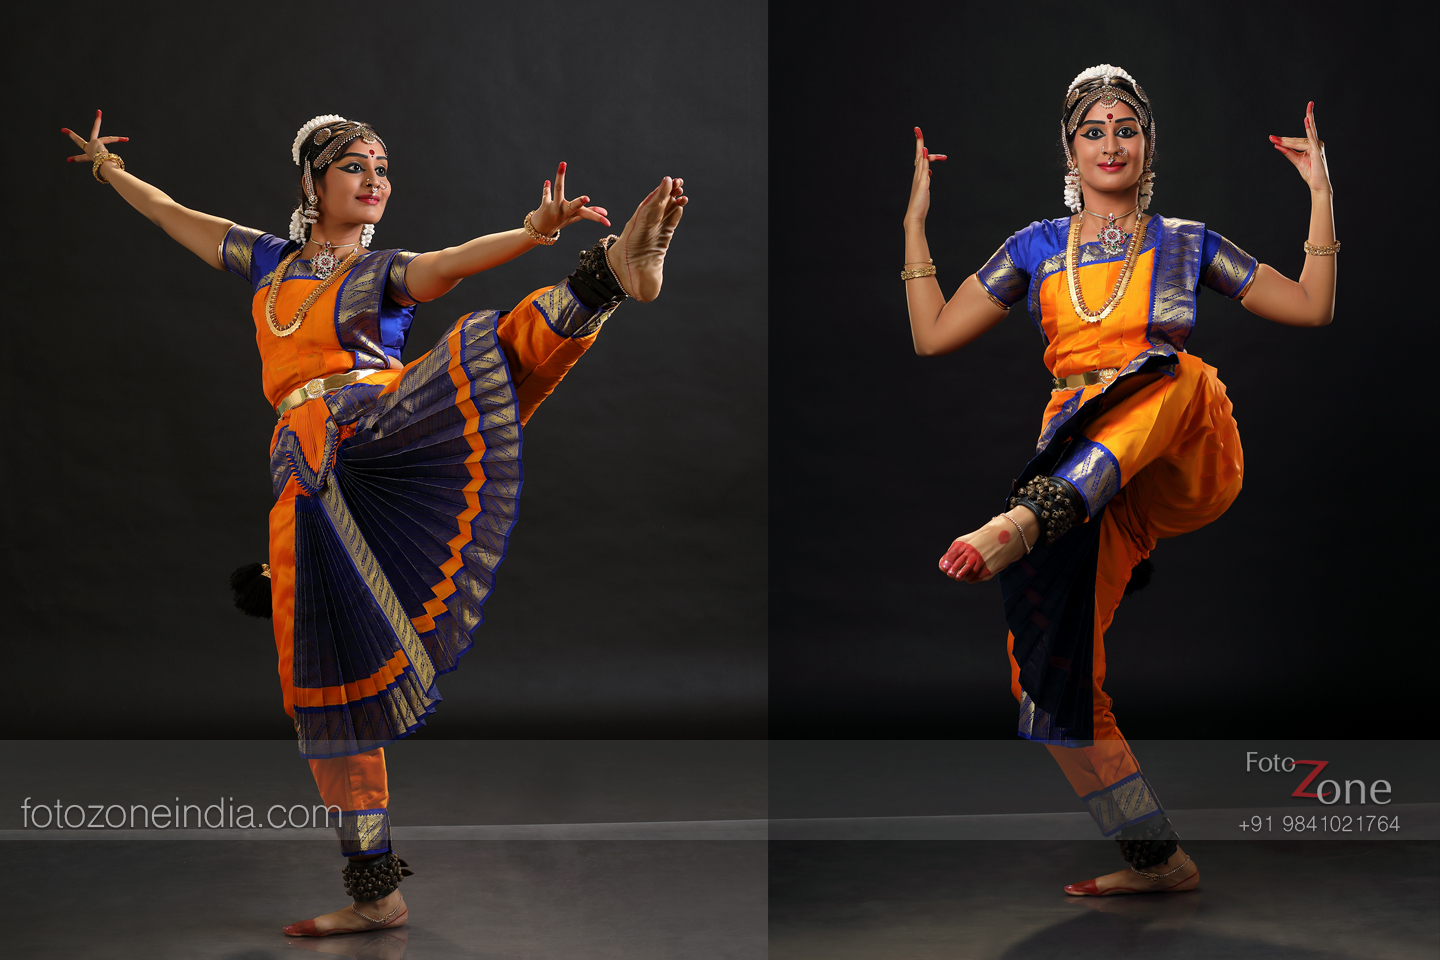 Image of Classical Dance Postures By an Indian Classical Dancer -ZW665334-Picxy